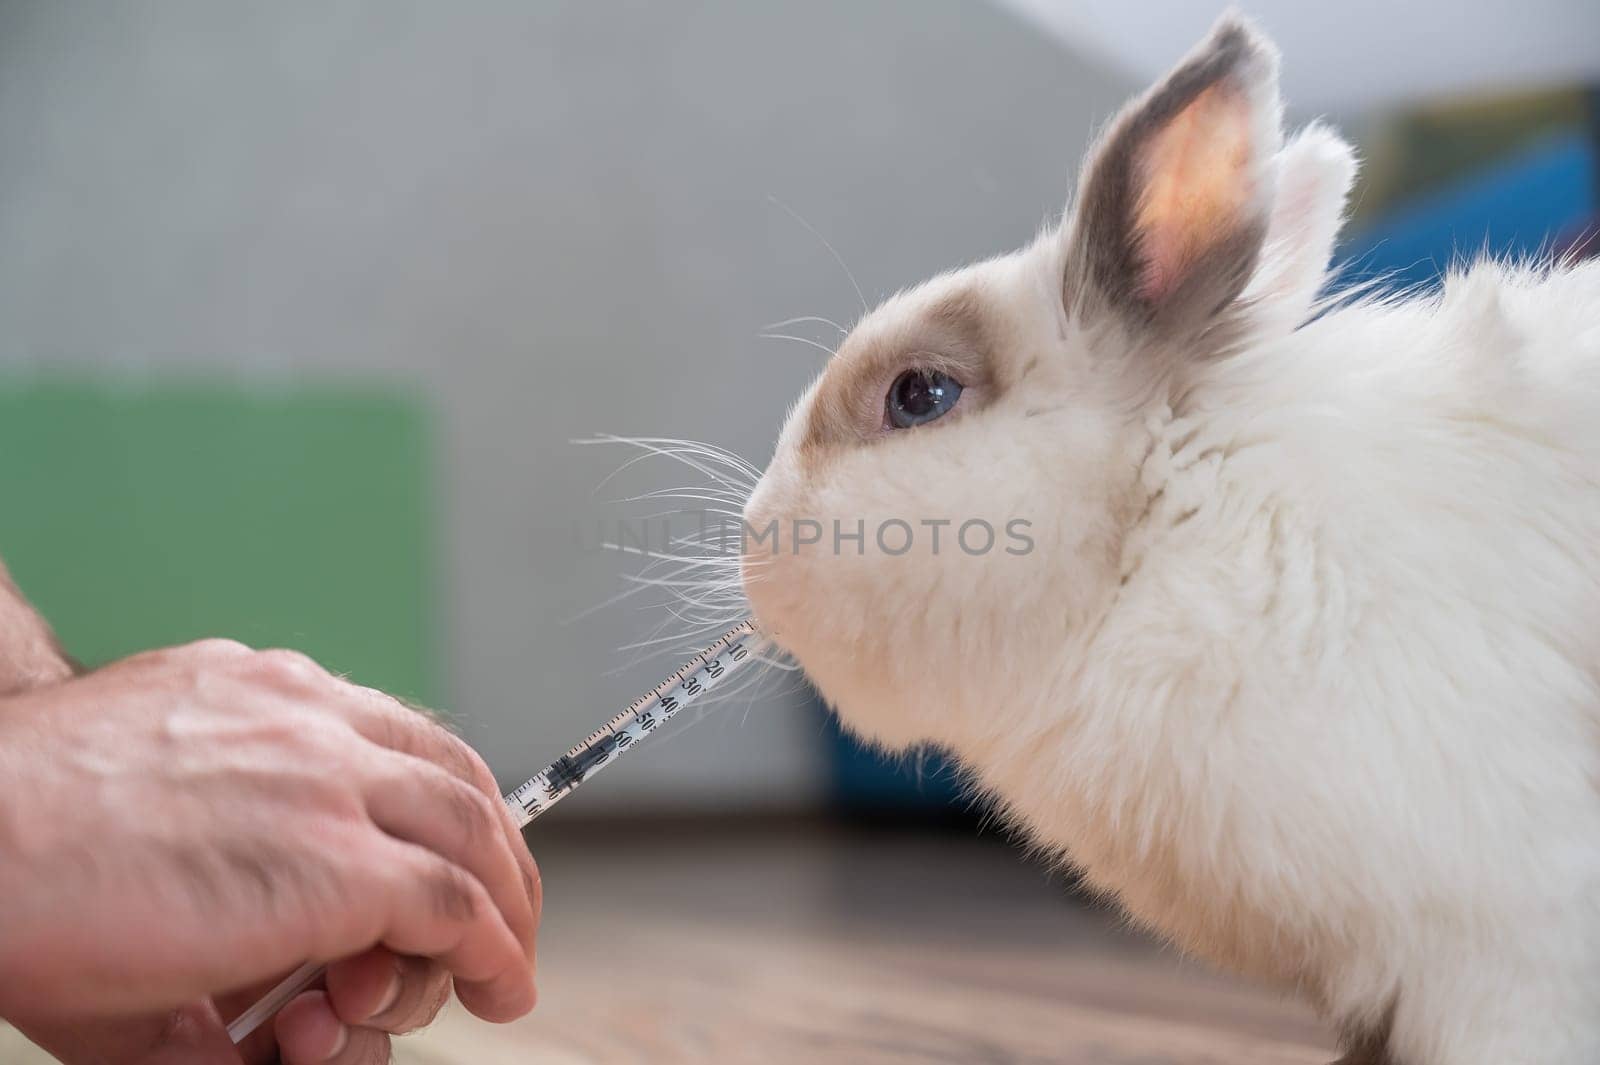 A man gives a rabbit medicine from a syringe. Bunny drinks from a syringe